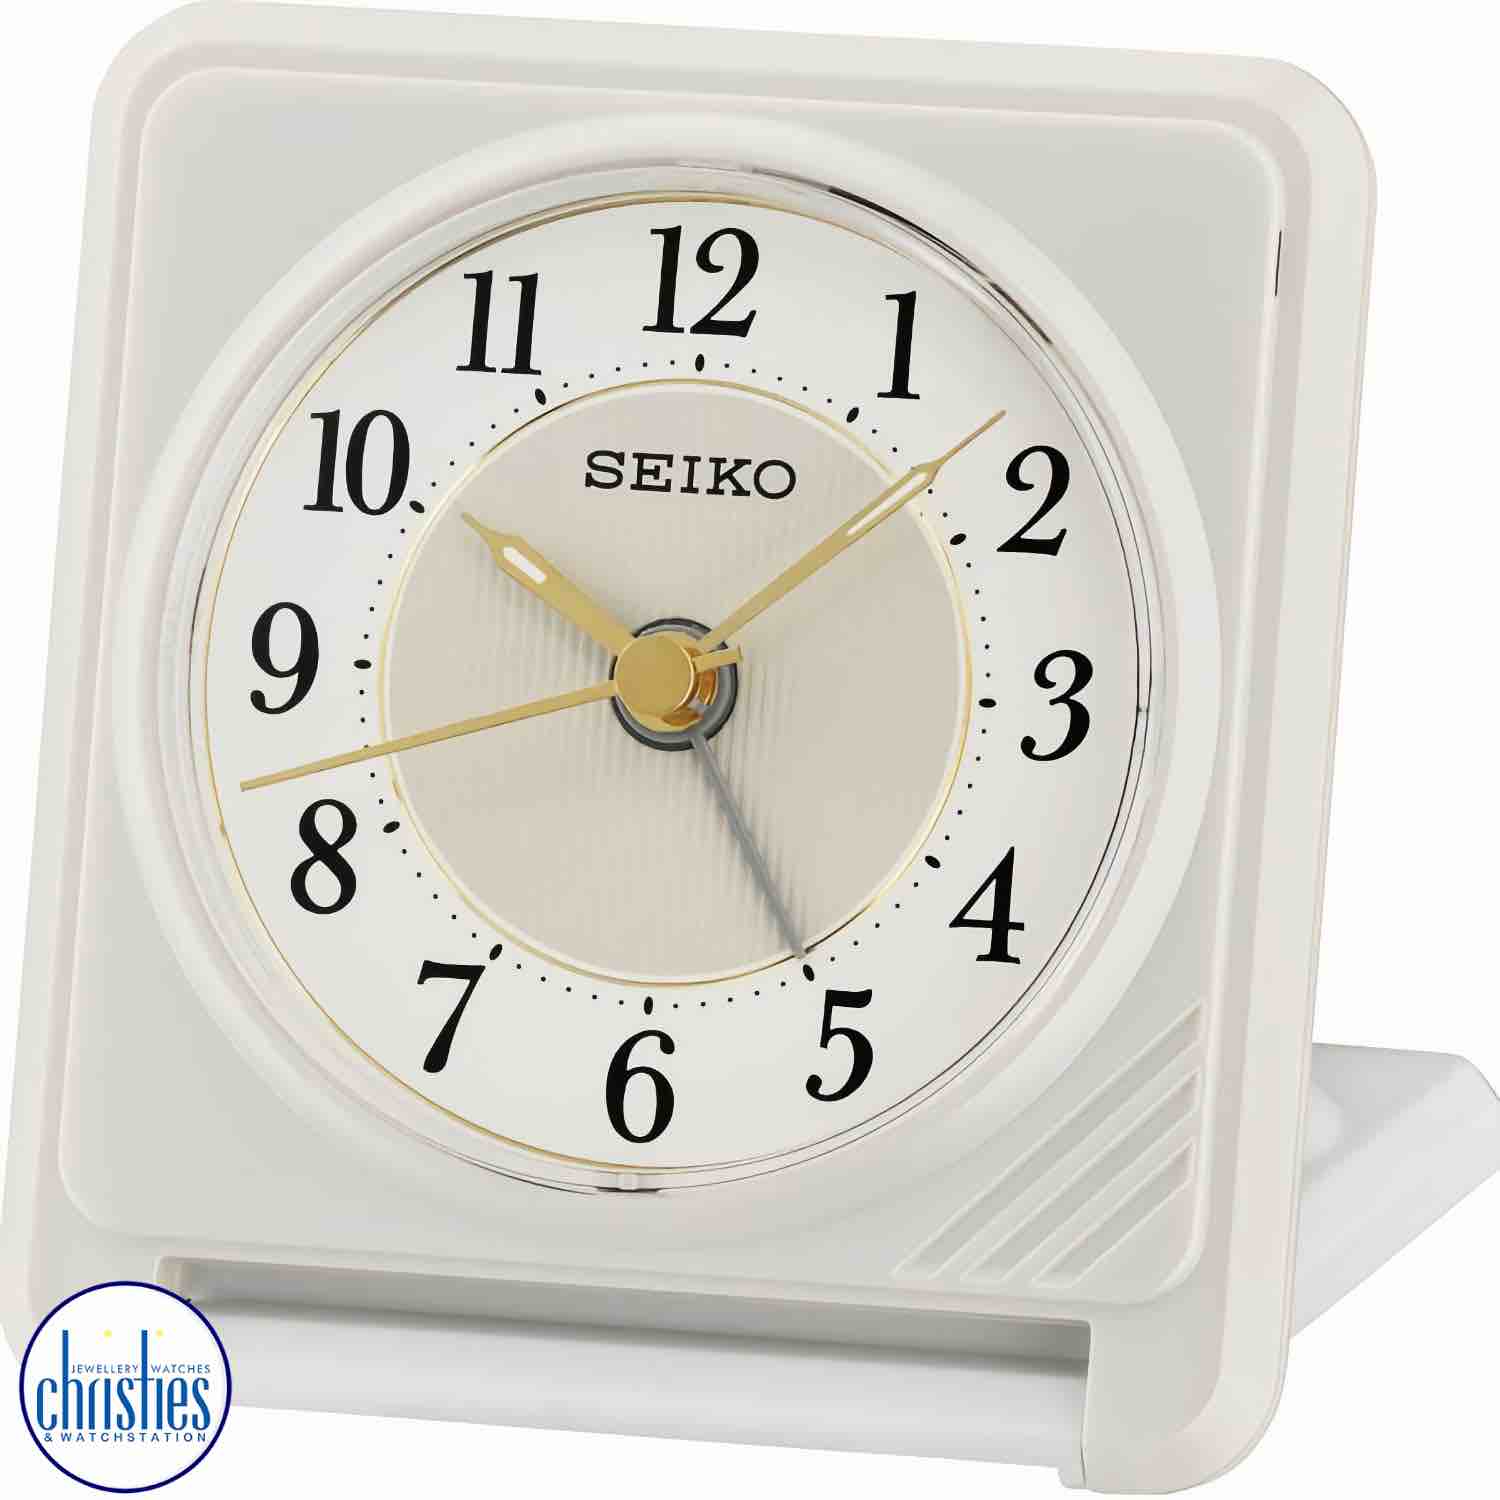 QHT016W Seiko Clocks Travel Alarm Clock. The Seiko QHT016W is a luminous travel alarm clock that features an ascending beep alarm, snooze function, and a light that can be activated by pressing the screen.